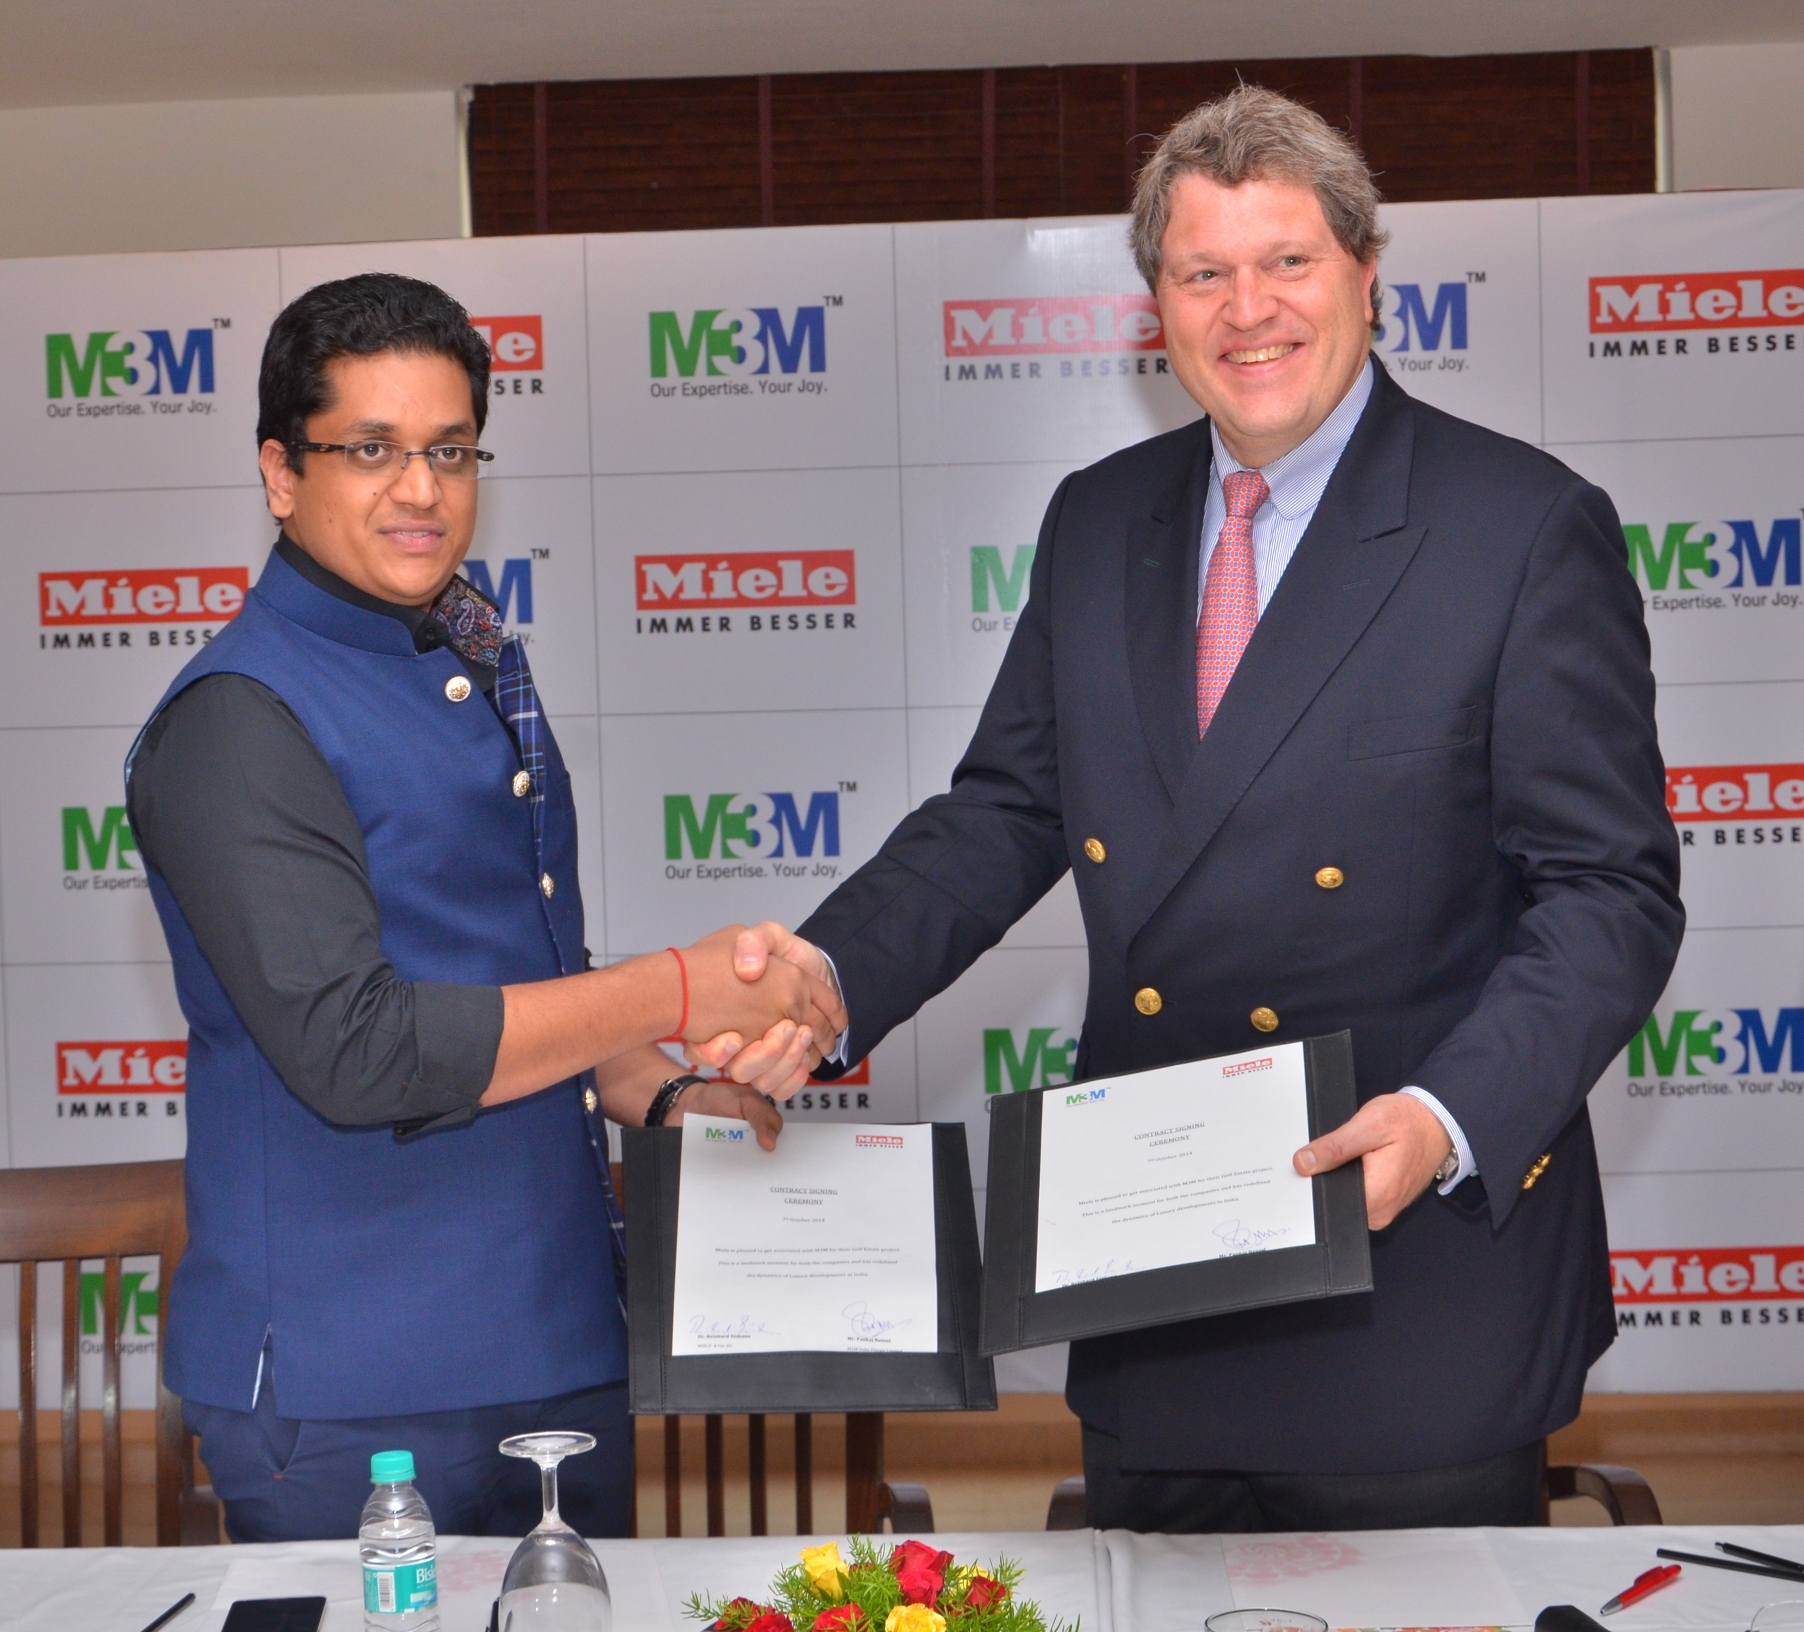 Pankaj Bansal, Director-M3M India with Dr. Reinhard Christian Zinkann, the proud co-owner and managing director of Miele Group, Germany, India real estate news, Indian realty news, India property market, Luxury real estate, Gurgaon real estate